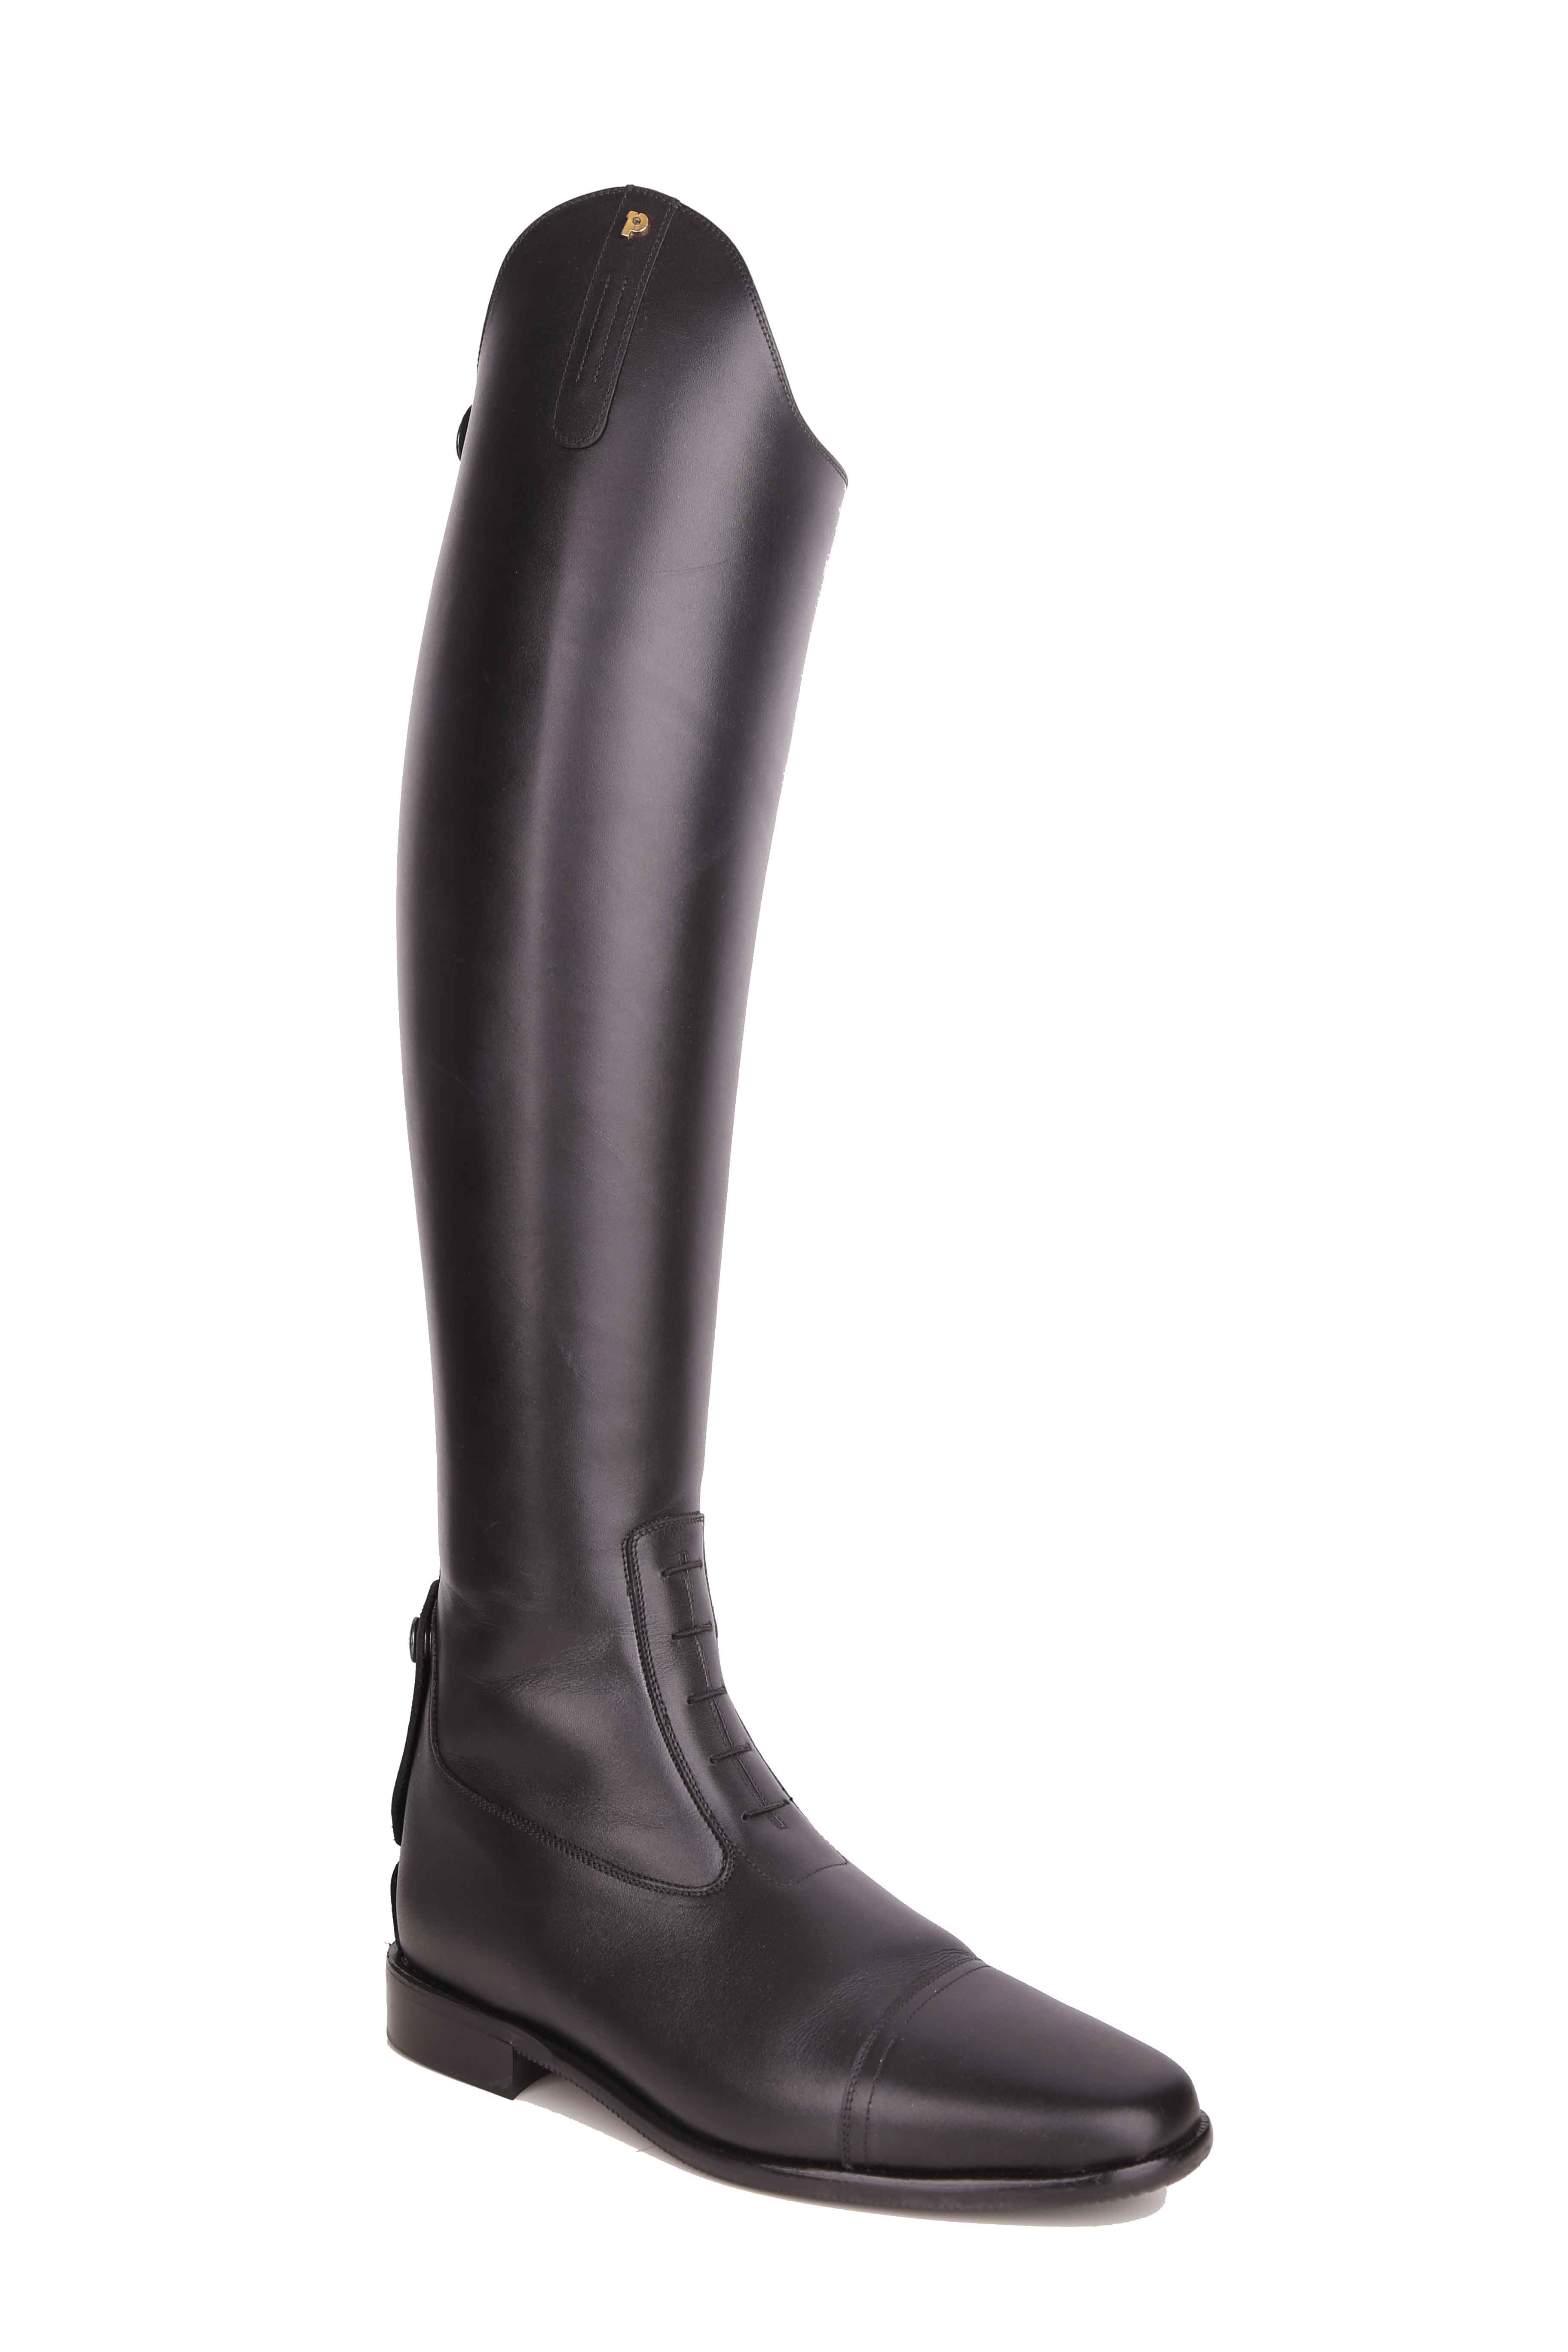 Petrie riding boot Coventry show jumping black | ridingboot.shop ...